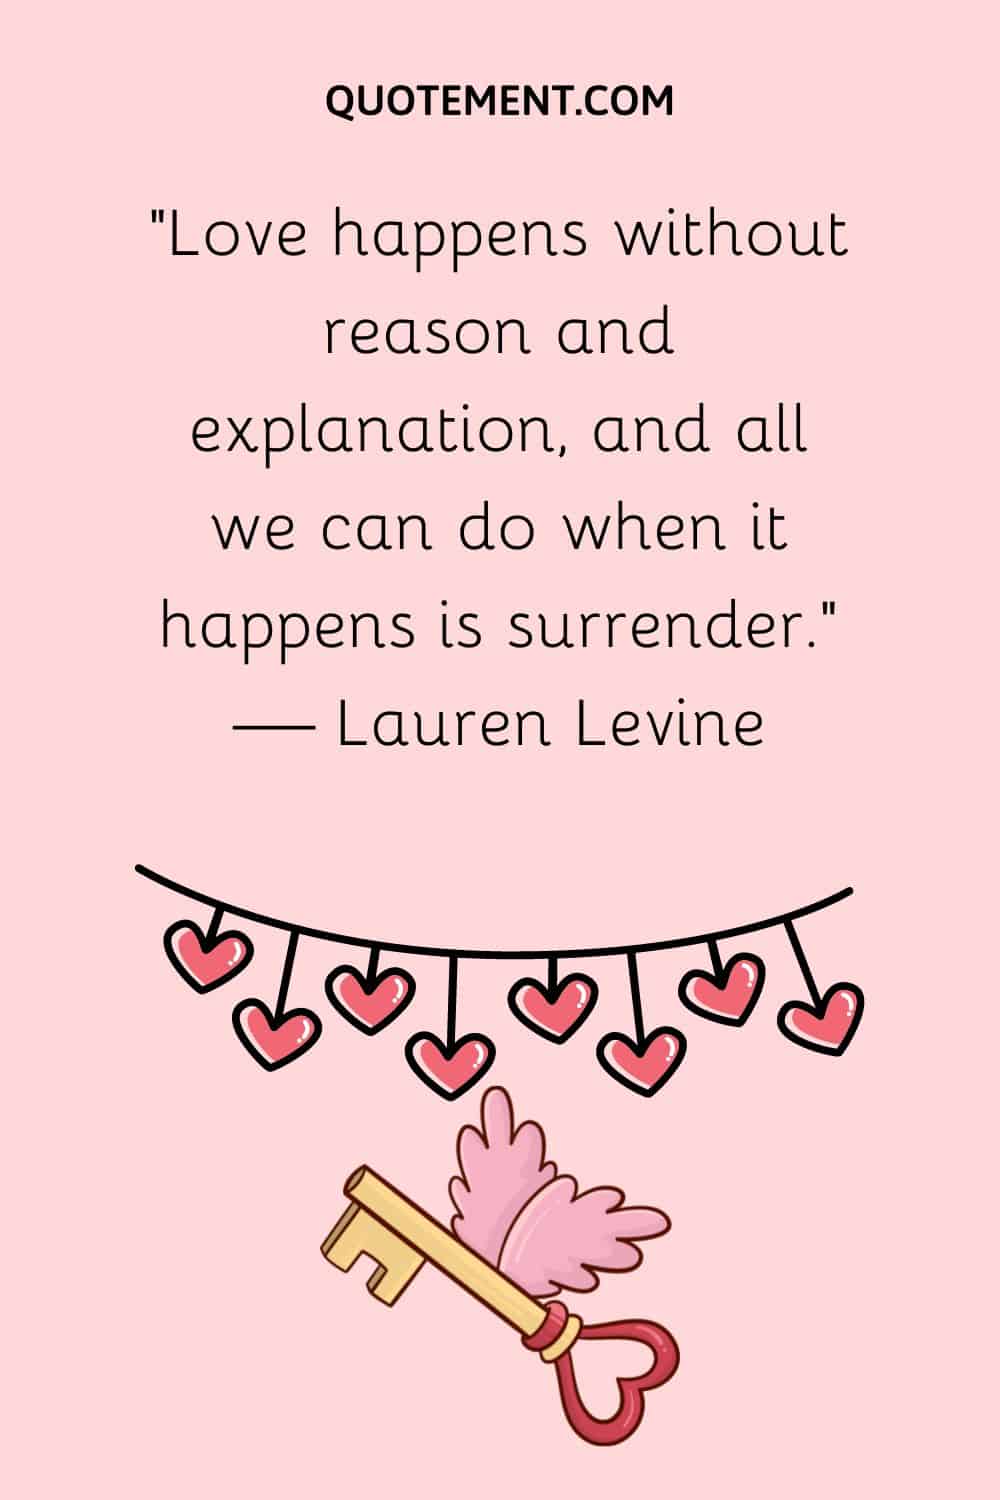 “Love happens without reason and explanation, and all we can do when it happens is surrender.” — Lauren Levine